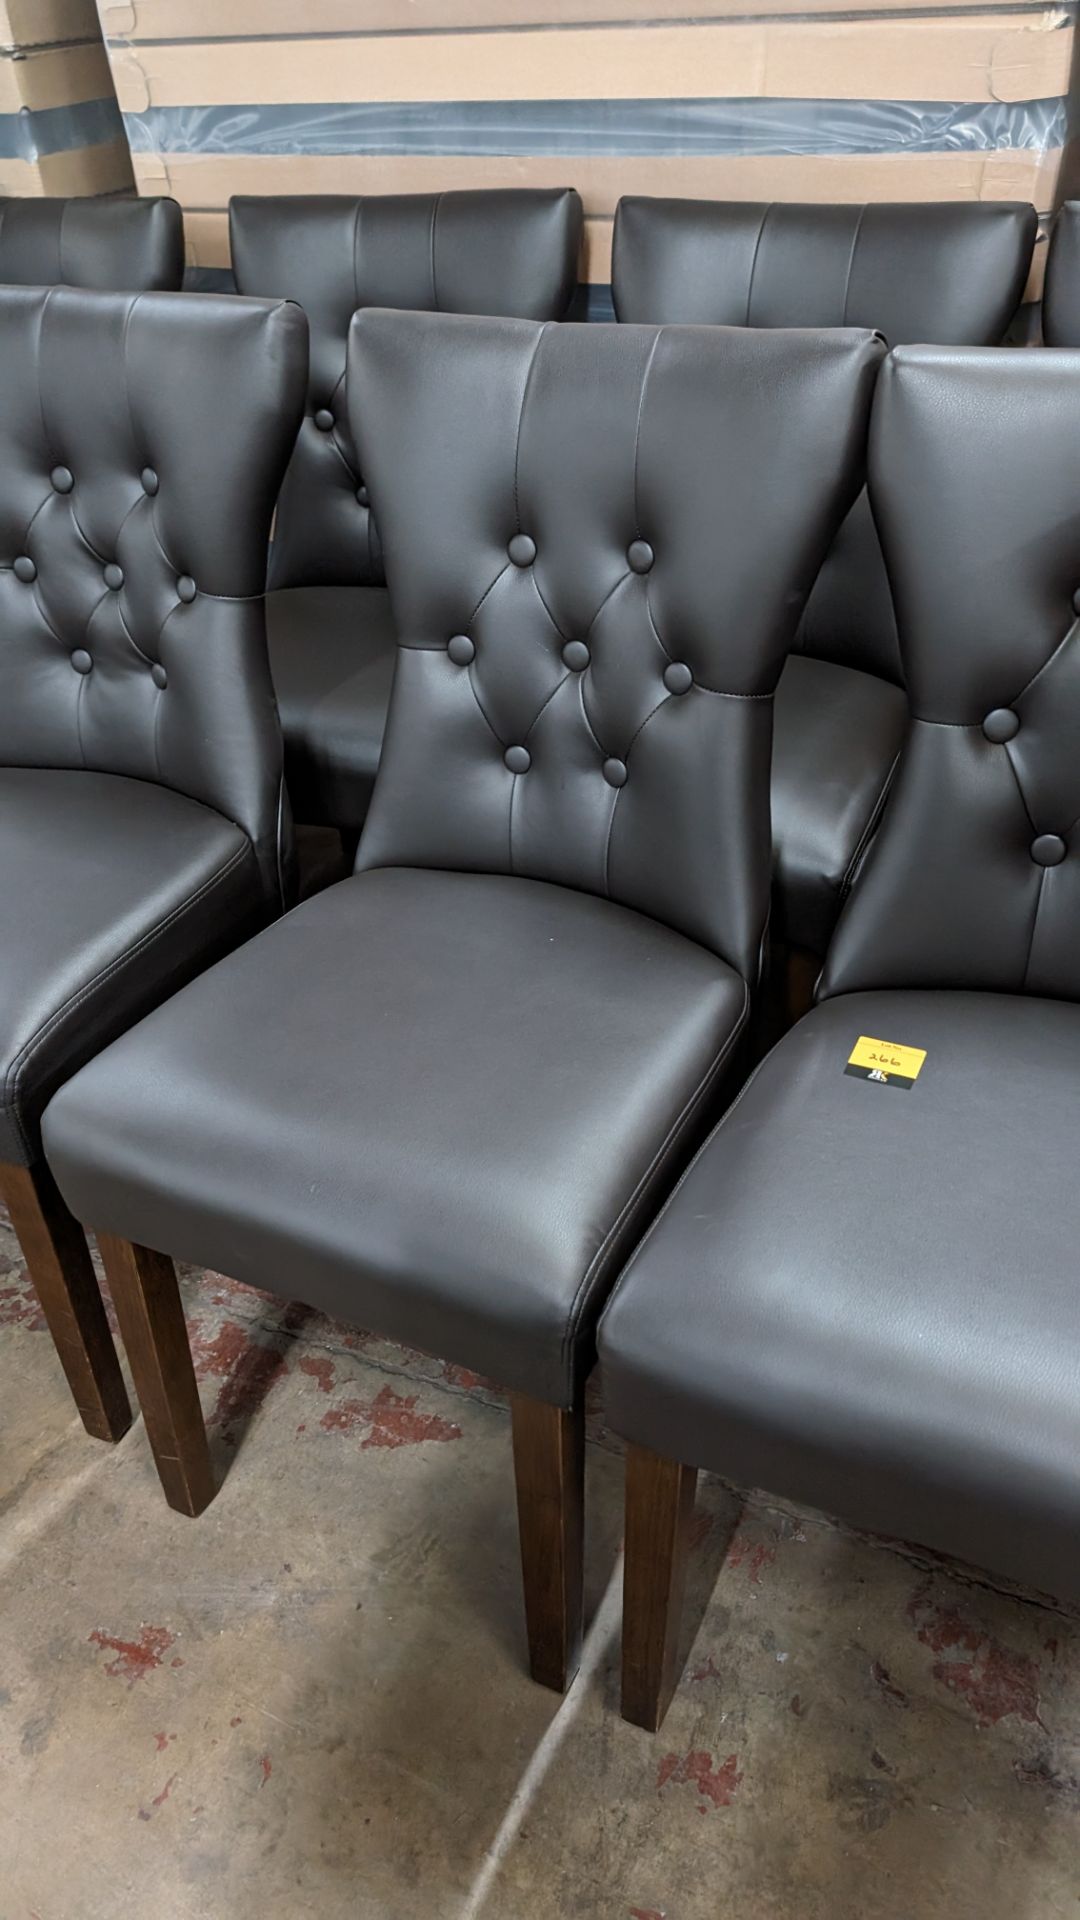 8 off matching pleather dark brown dining chairs - Image 4 of 7